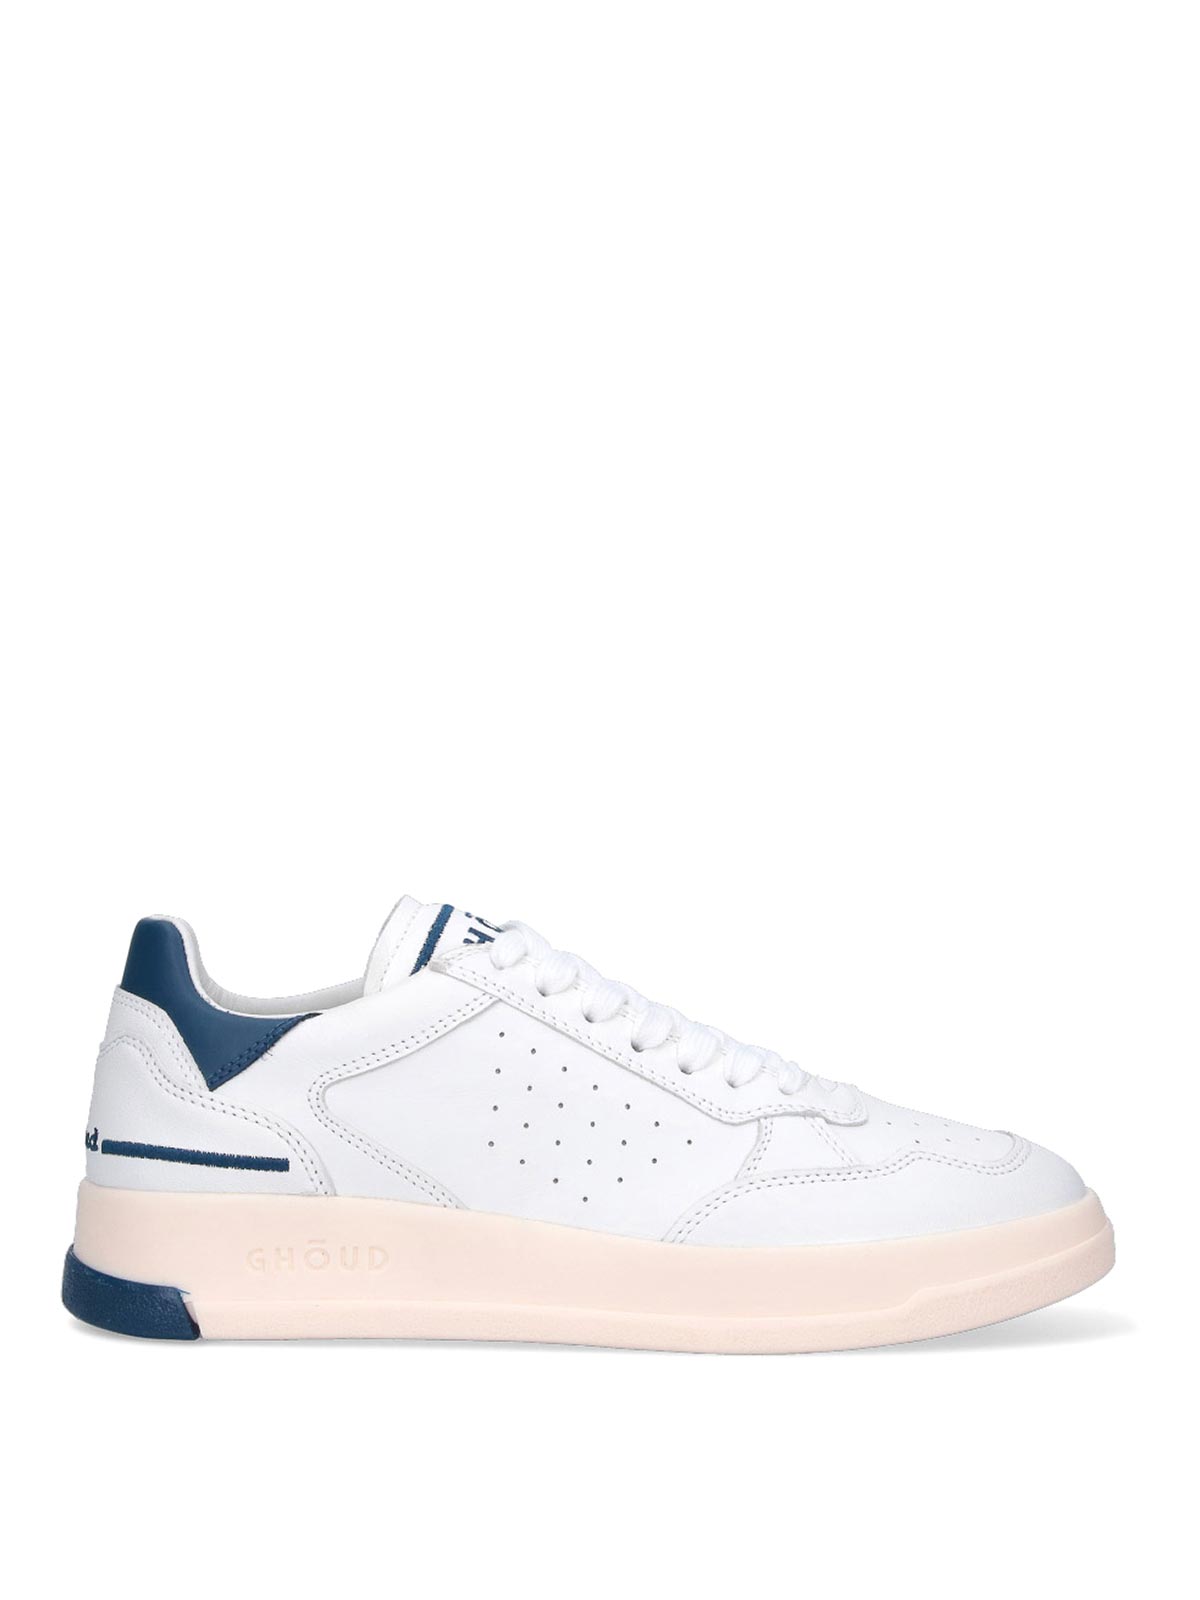 Shop Ghoud Venice Leather Sneakers In White